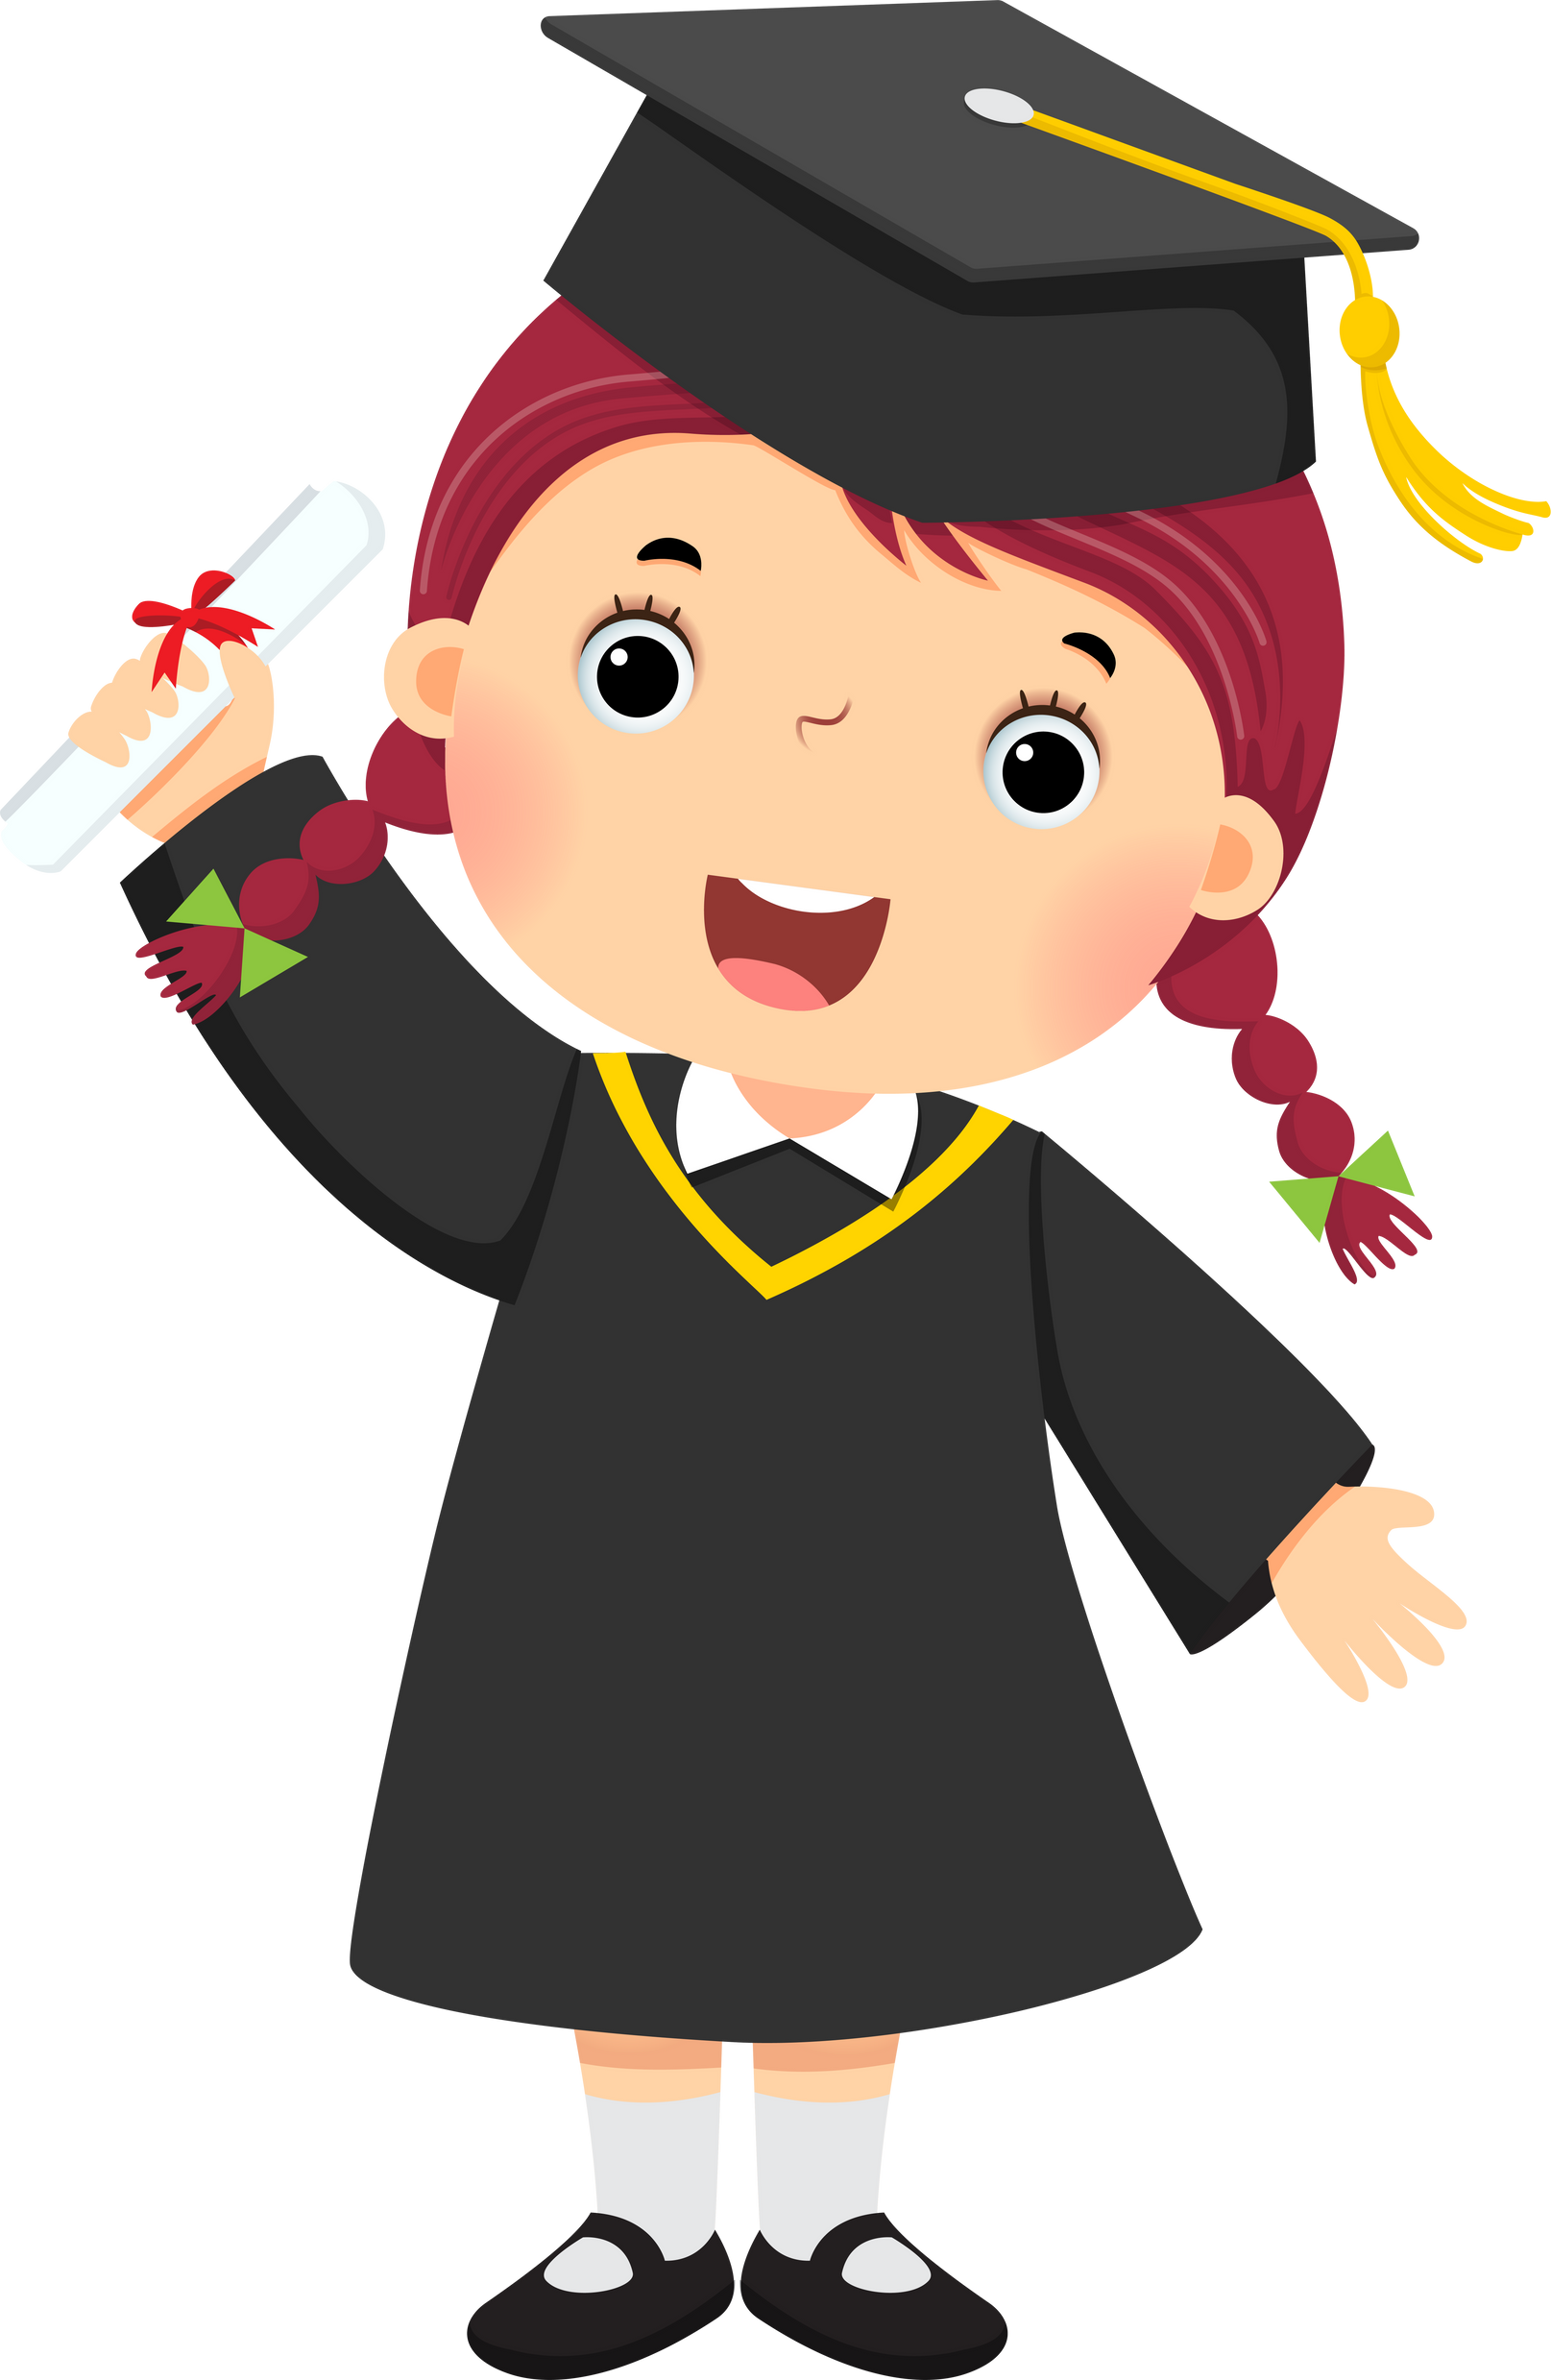 Cartoon girl in a graduation gown and mortar board 2